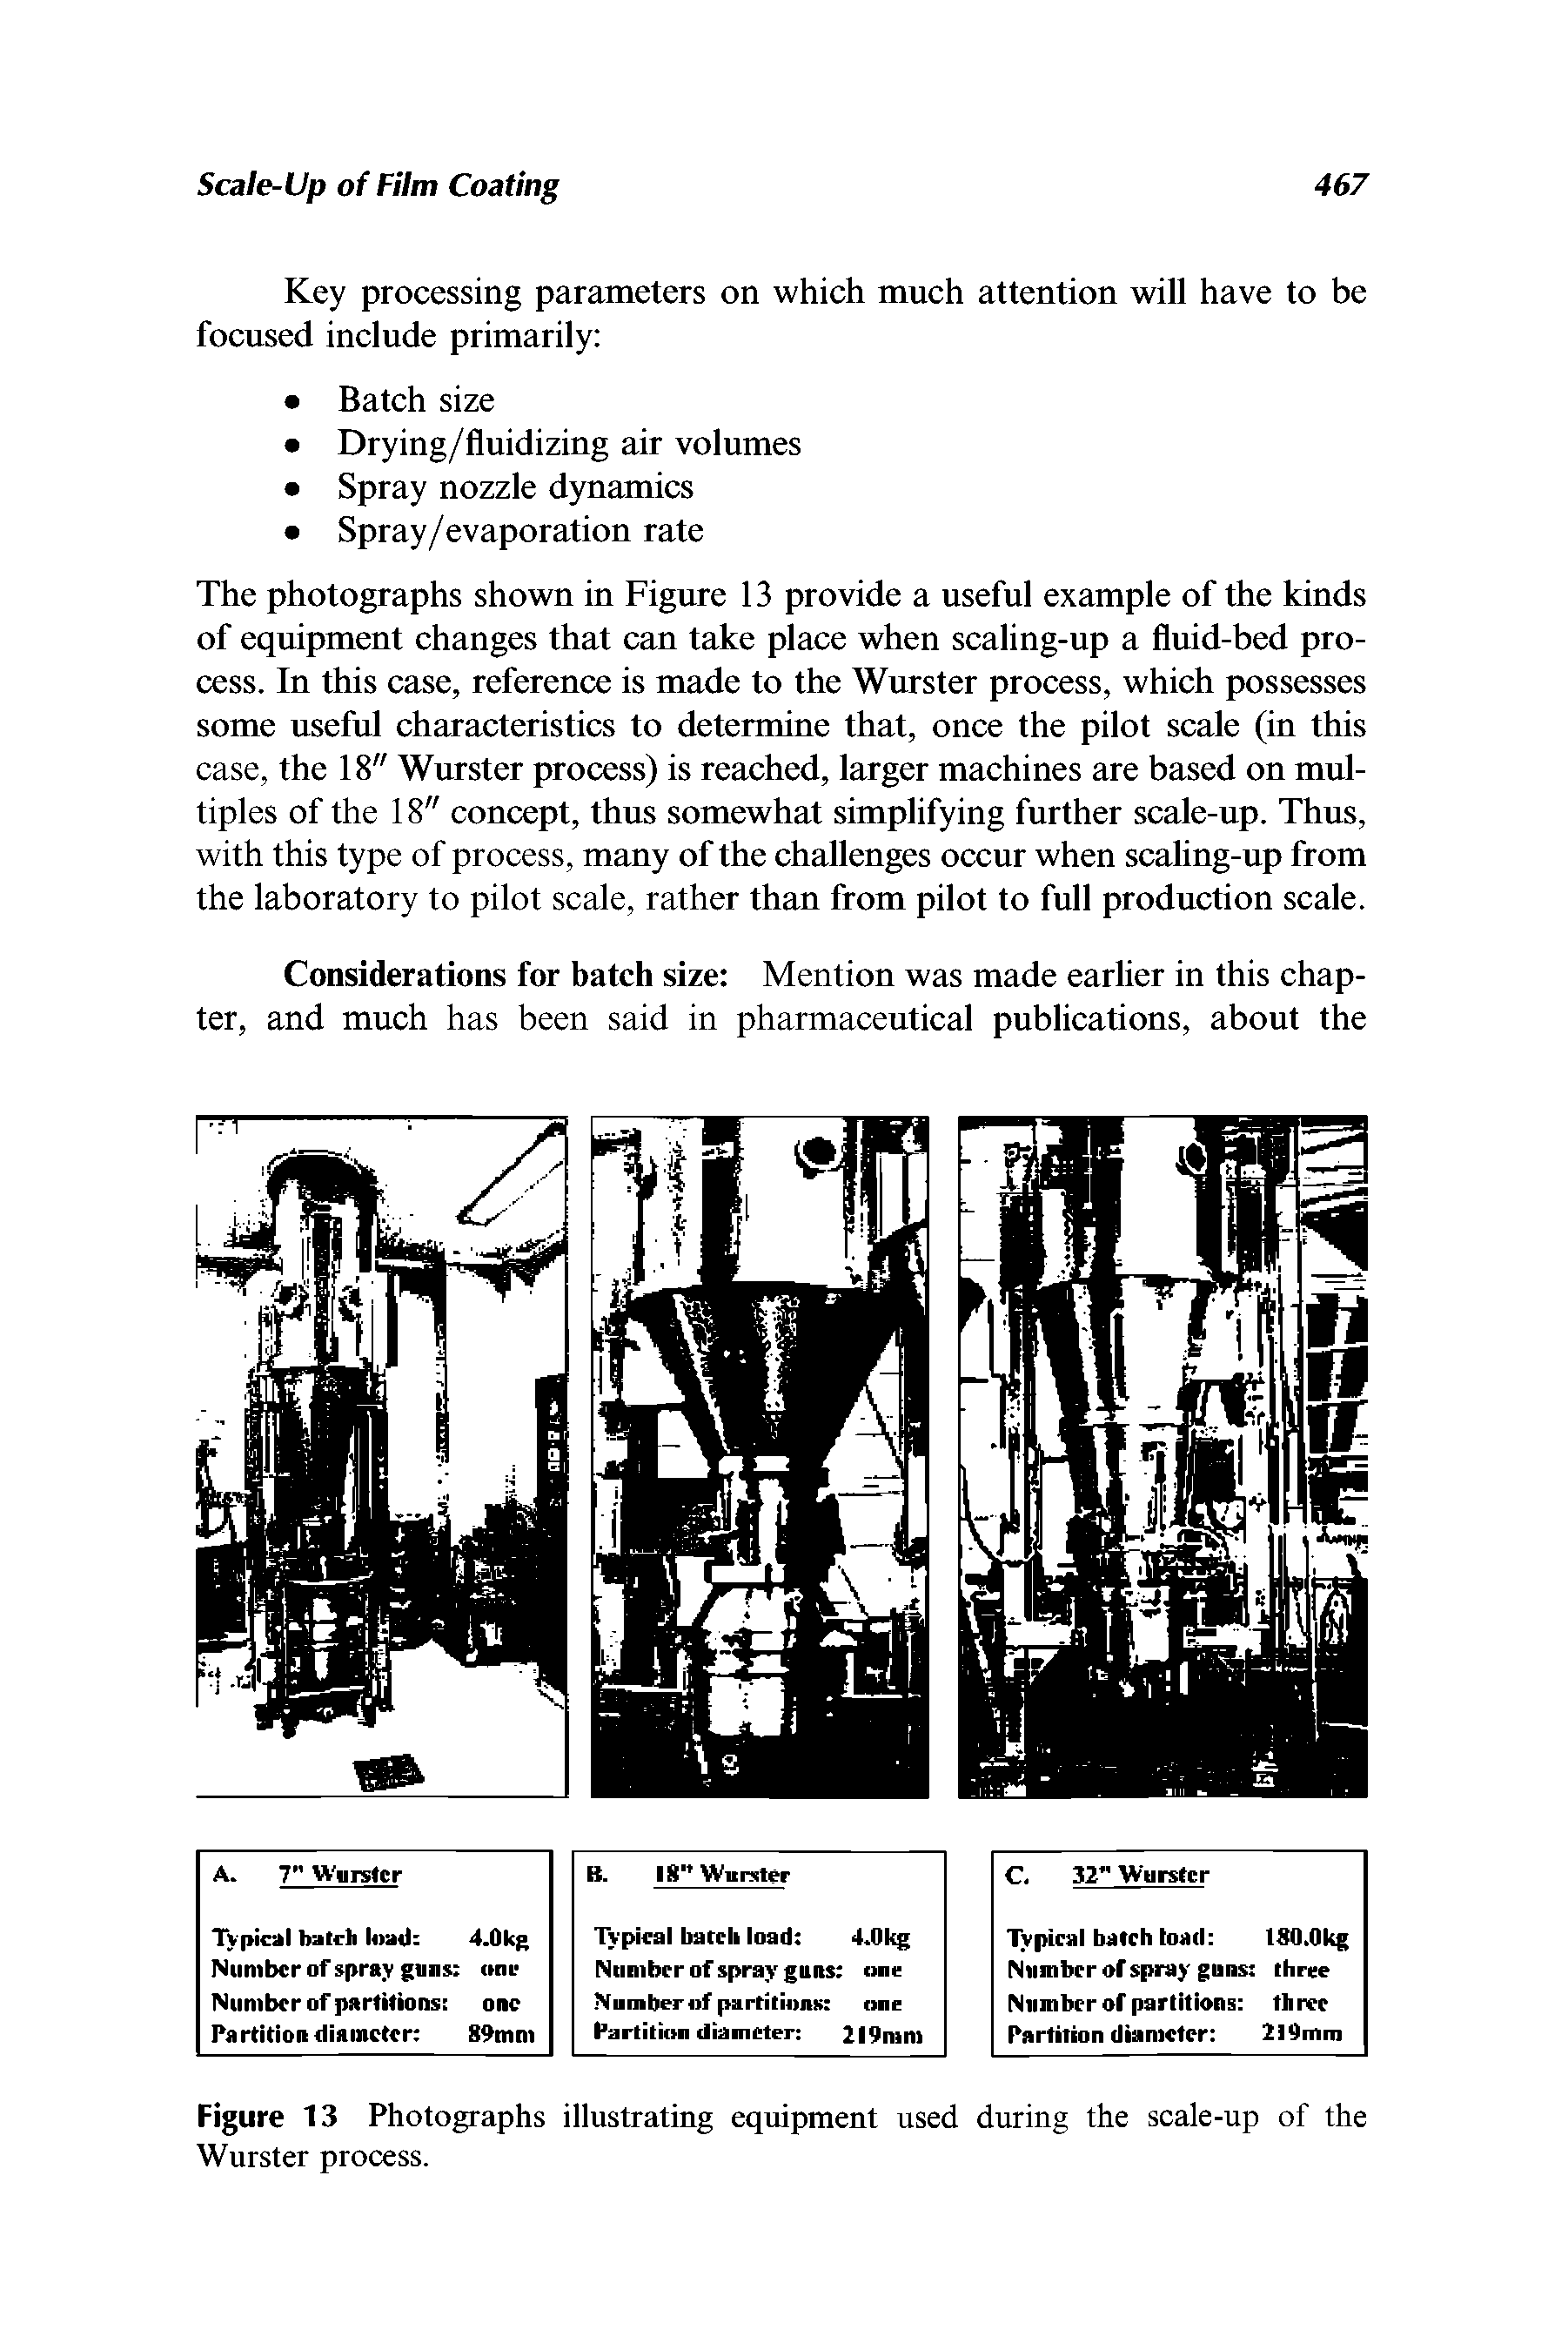 Figure 13 Photographs illustrating equipment used during the scale-up of the Wurster process.